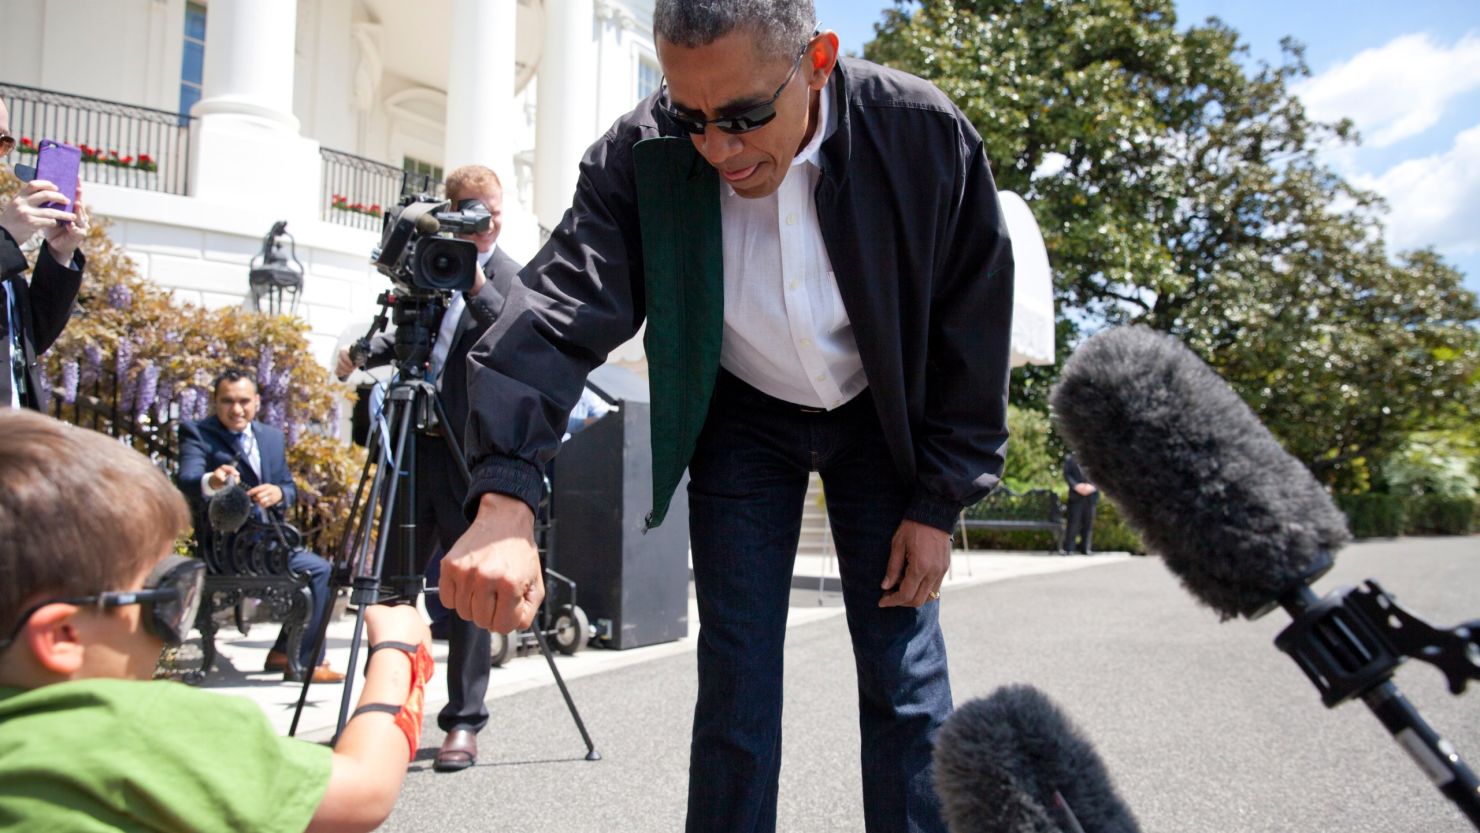 President Barack Obama greets Luca Martinez, 4, with a fist-bump as he walks from the White House to board Marine One.